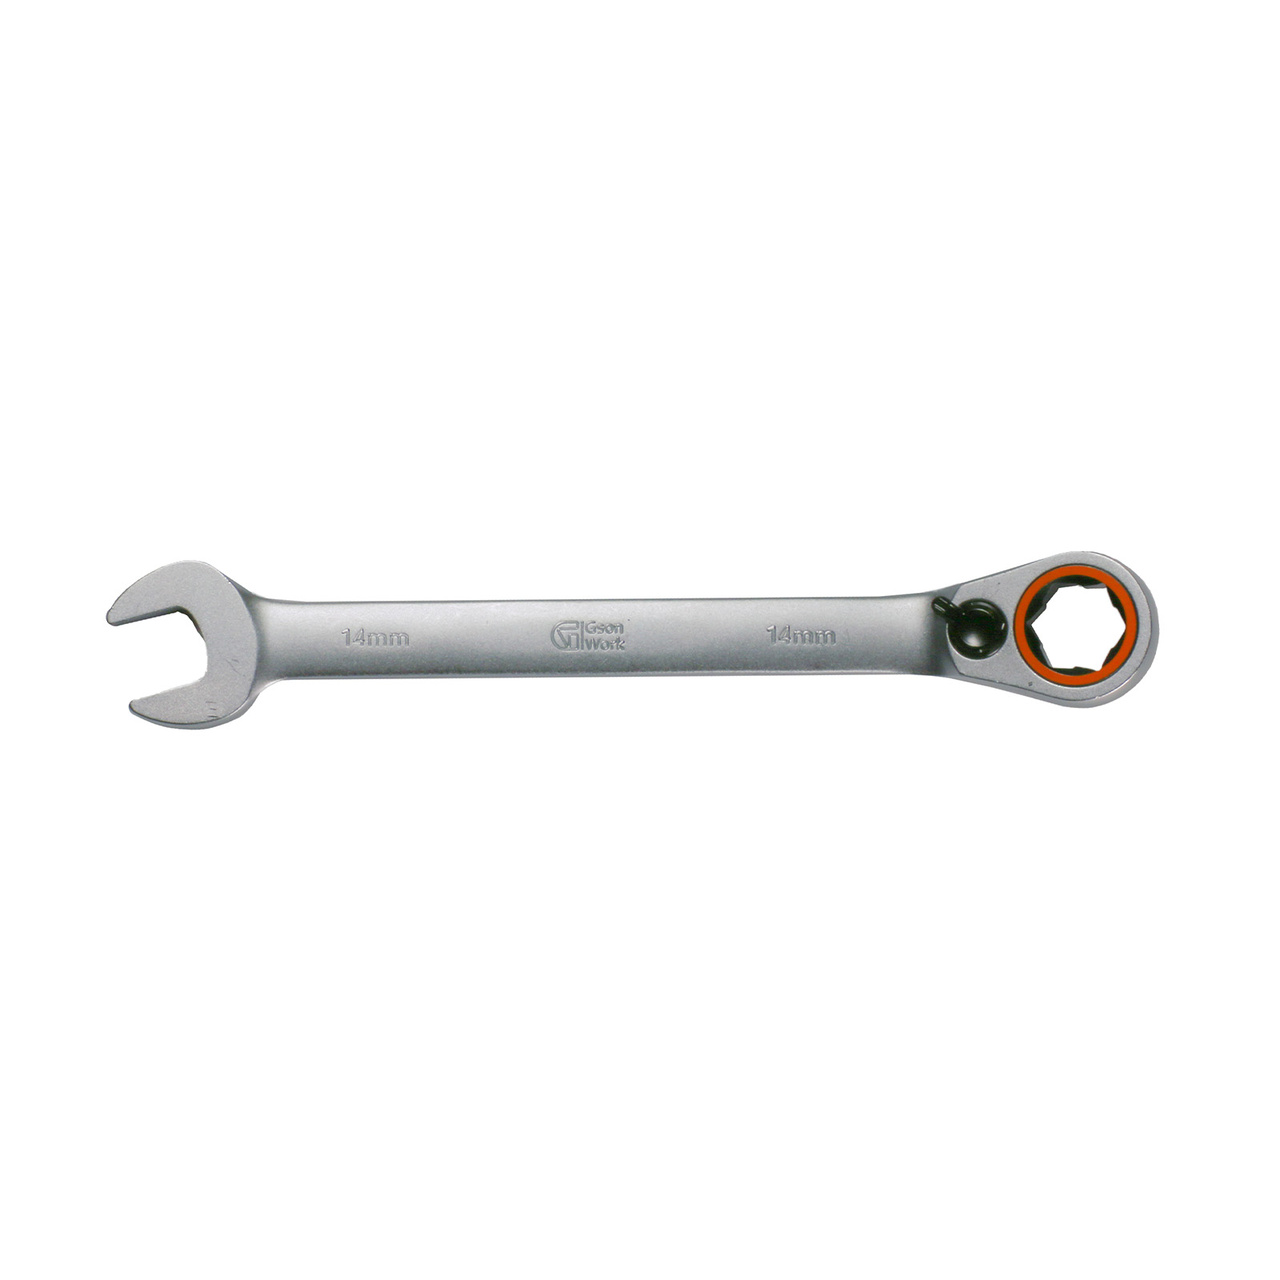 Reversible Rose Ratchet Wrench 12 mm